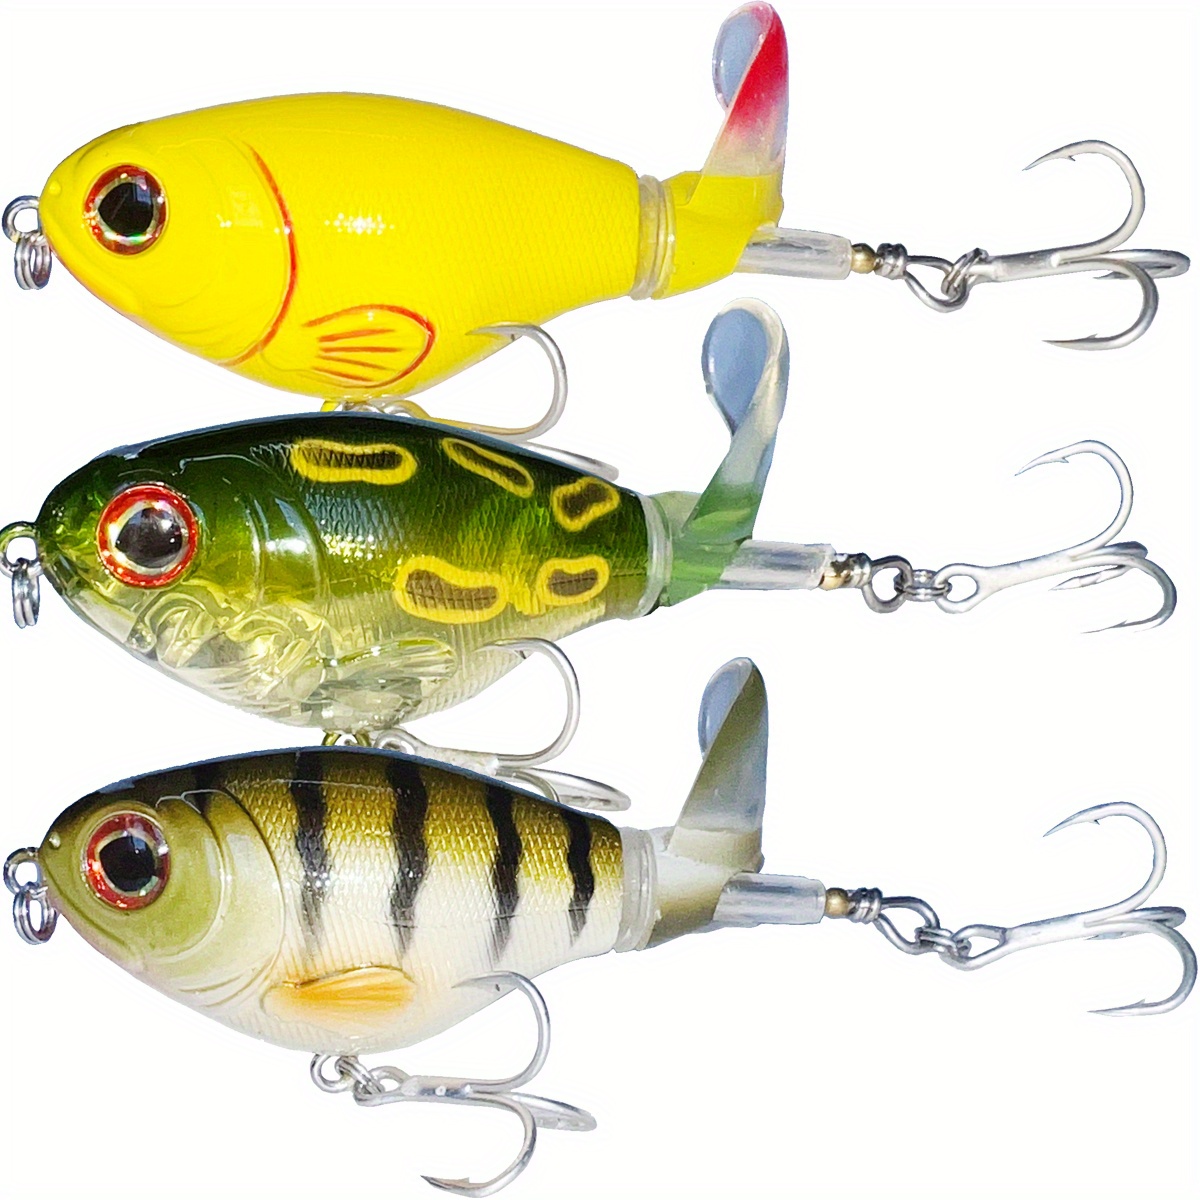 Top Water Fishing Lures with Rotating Tail, Freshwater and Saltwater Hard  baits kit for Bass Catfish Pike Perch etc.